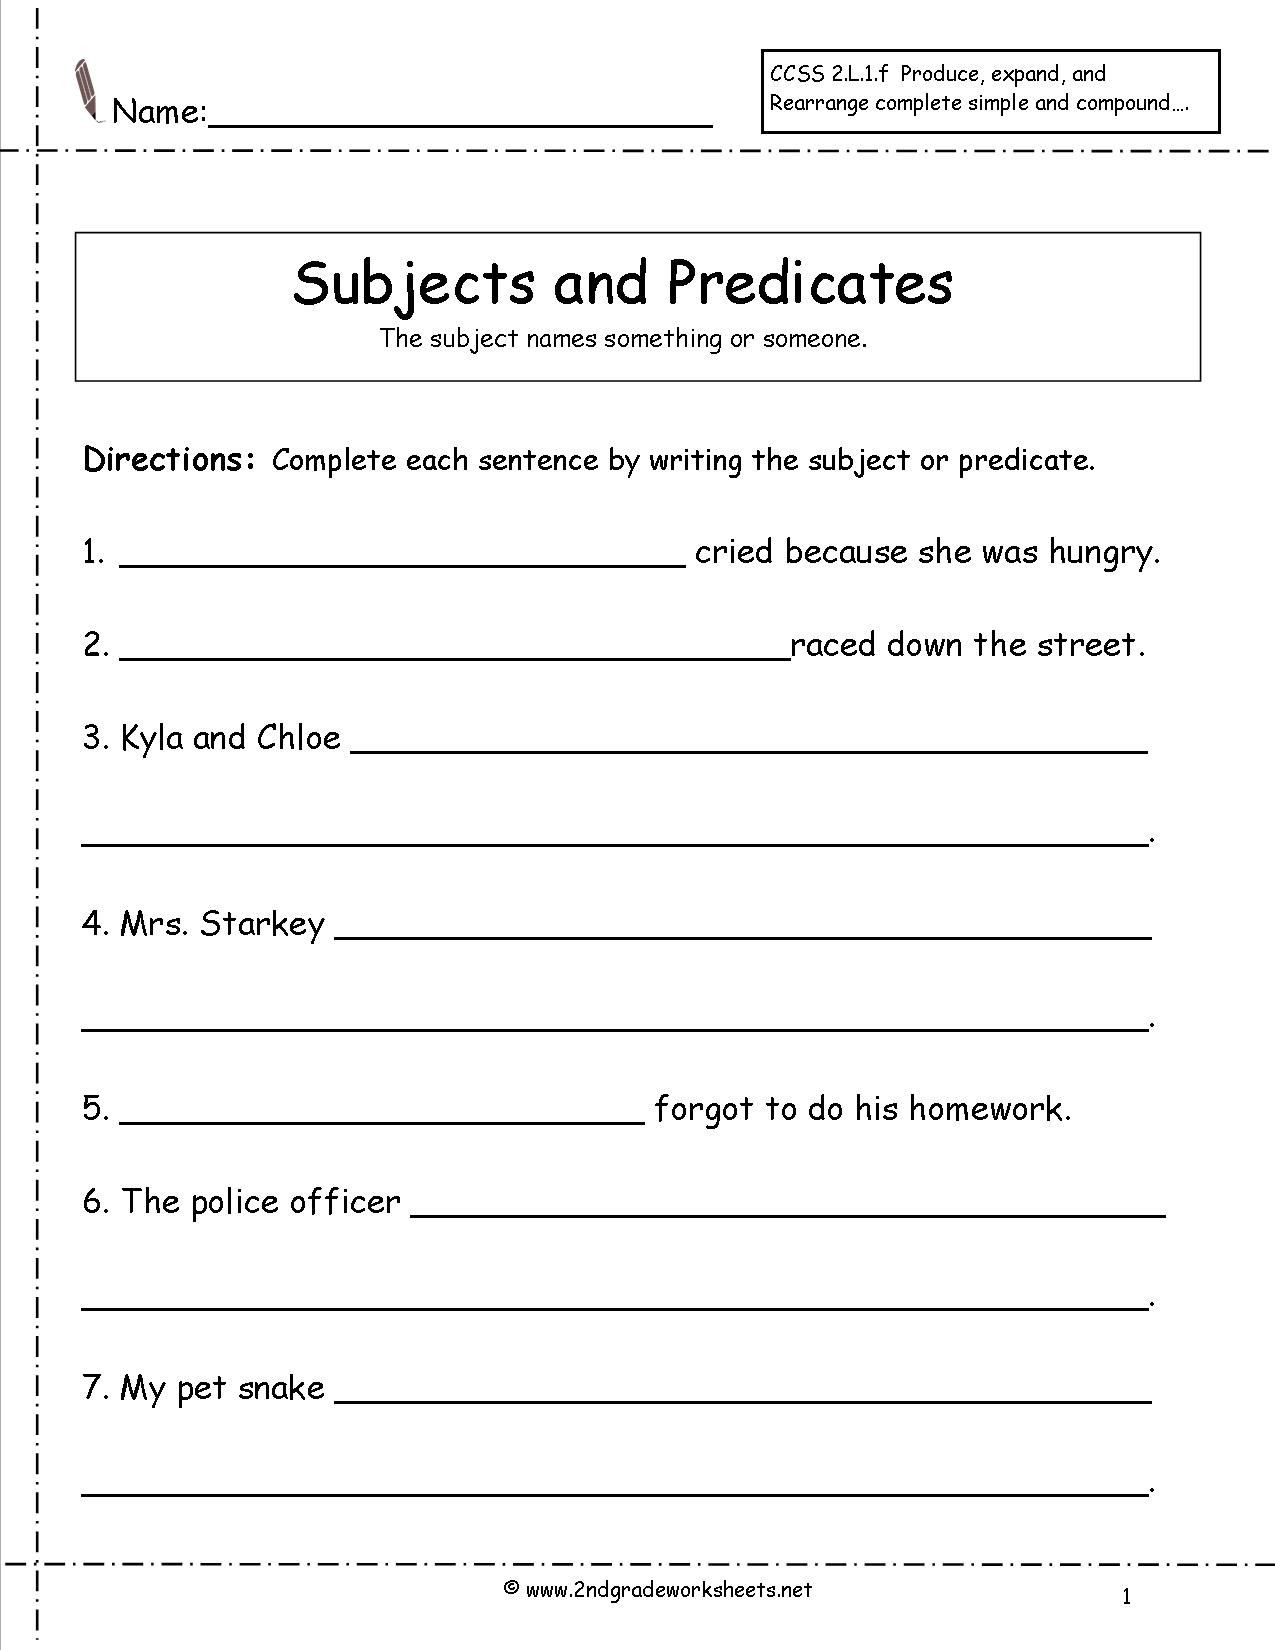 Subjects and Predicates Worksheet Subject and Predicate Worksheet